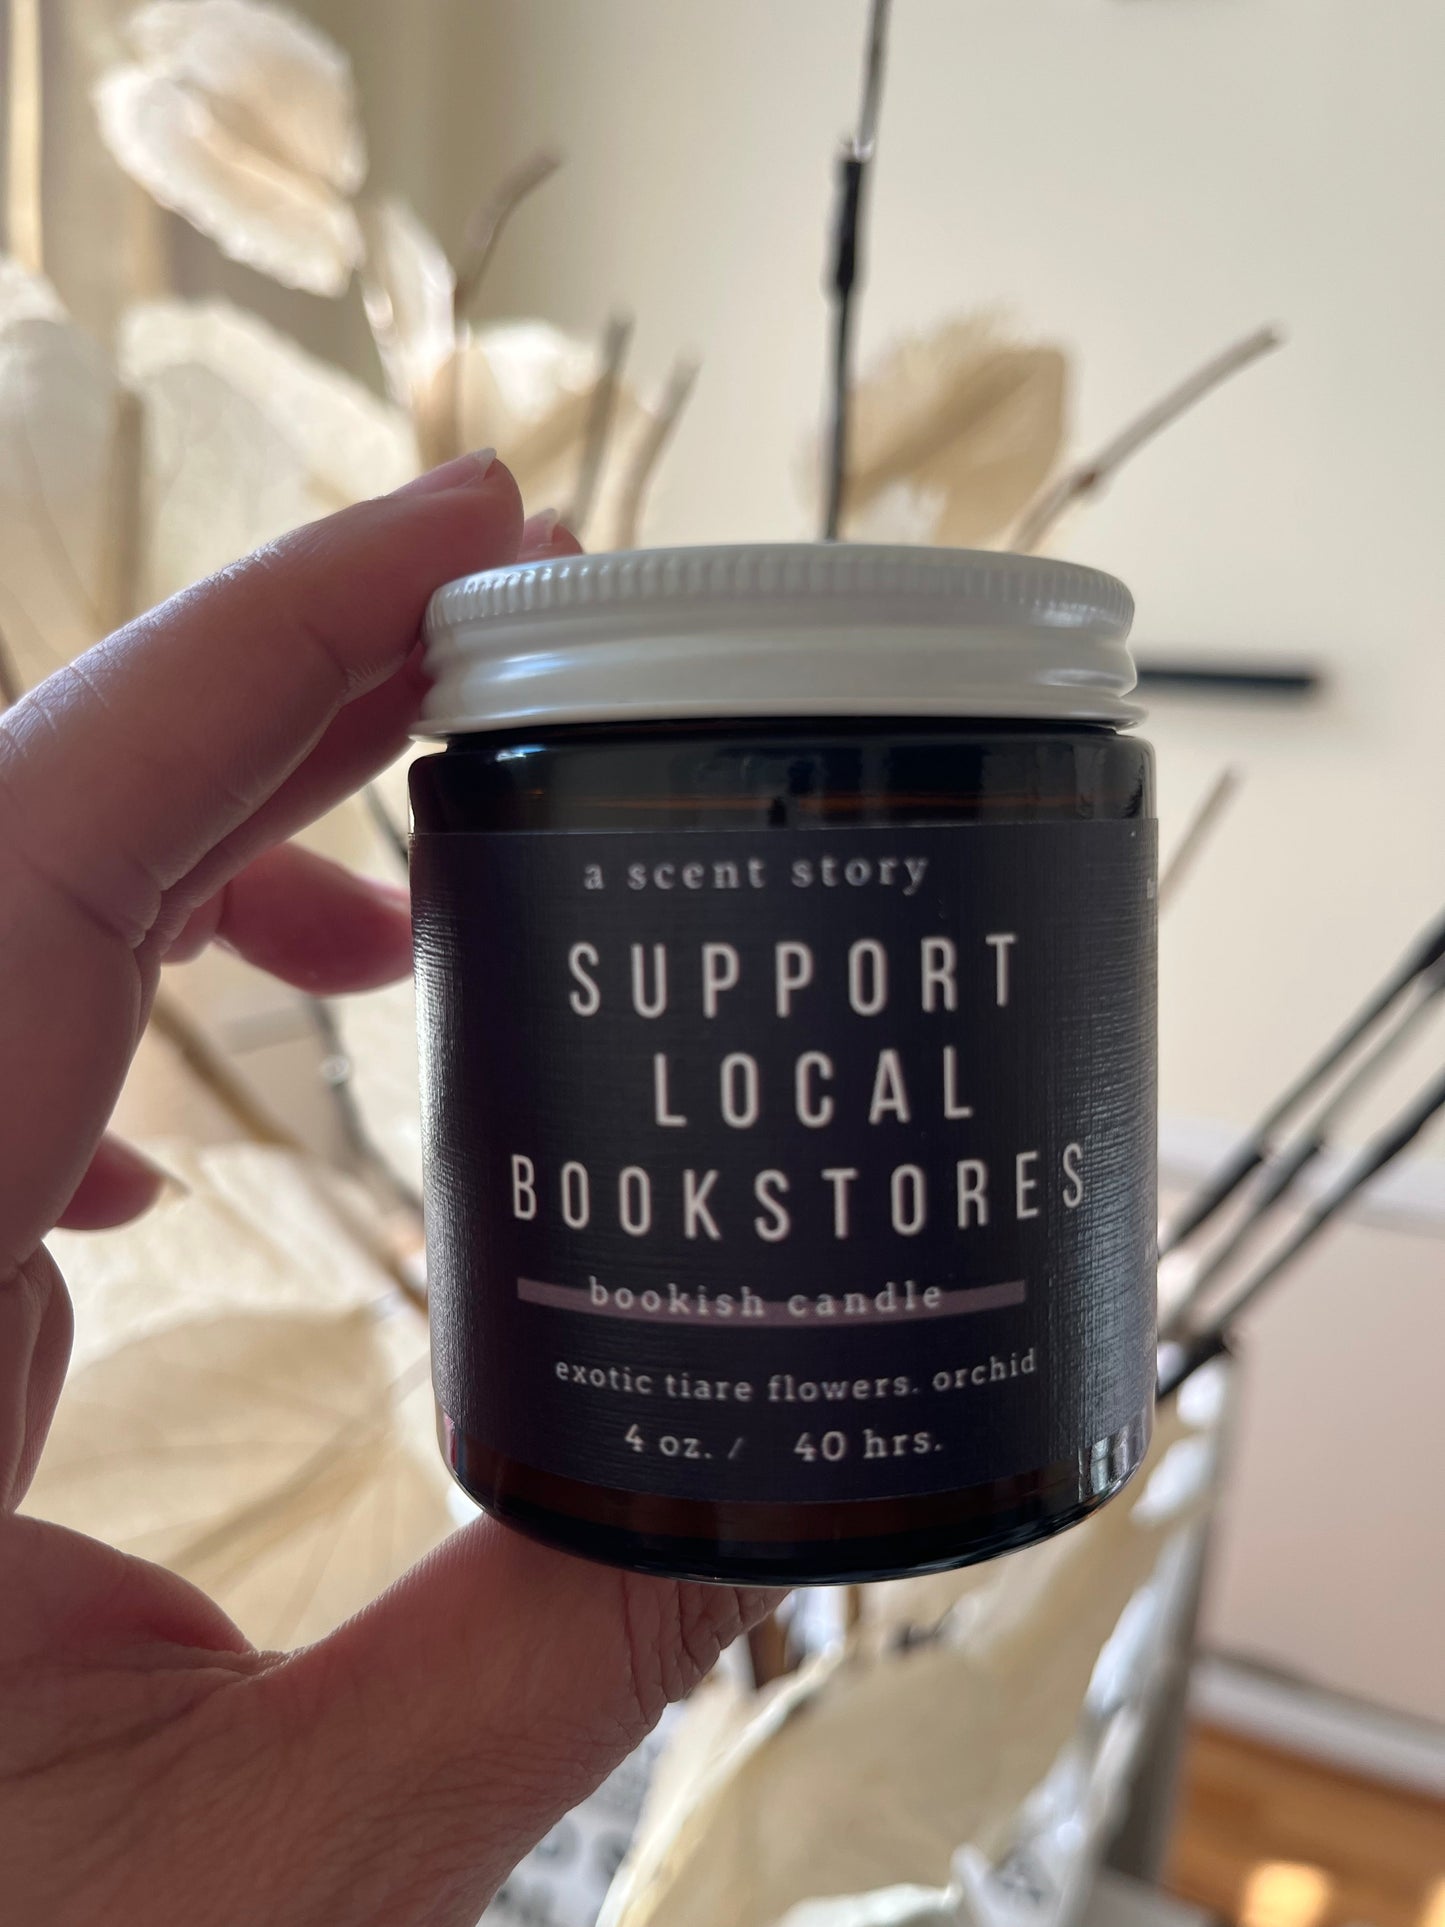 Support Local Bookstores